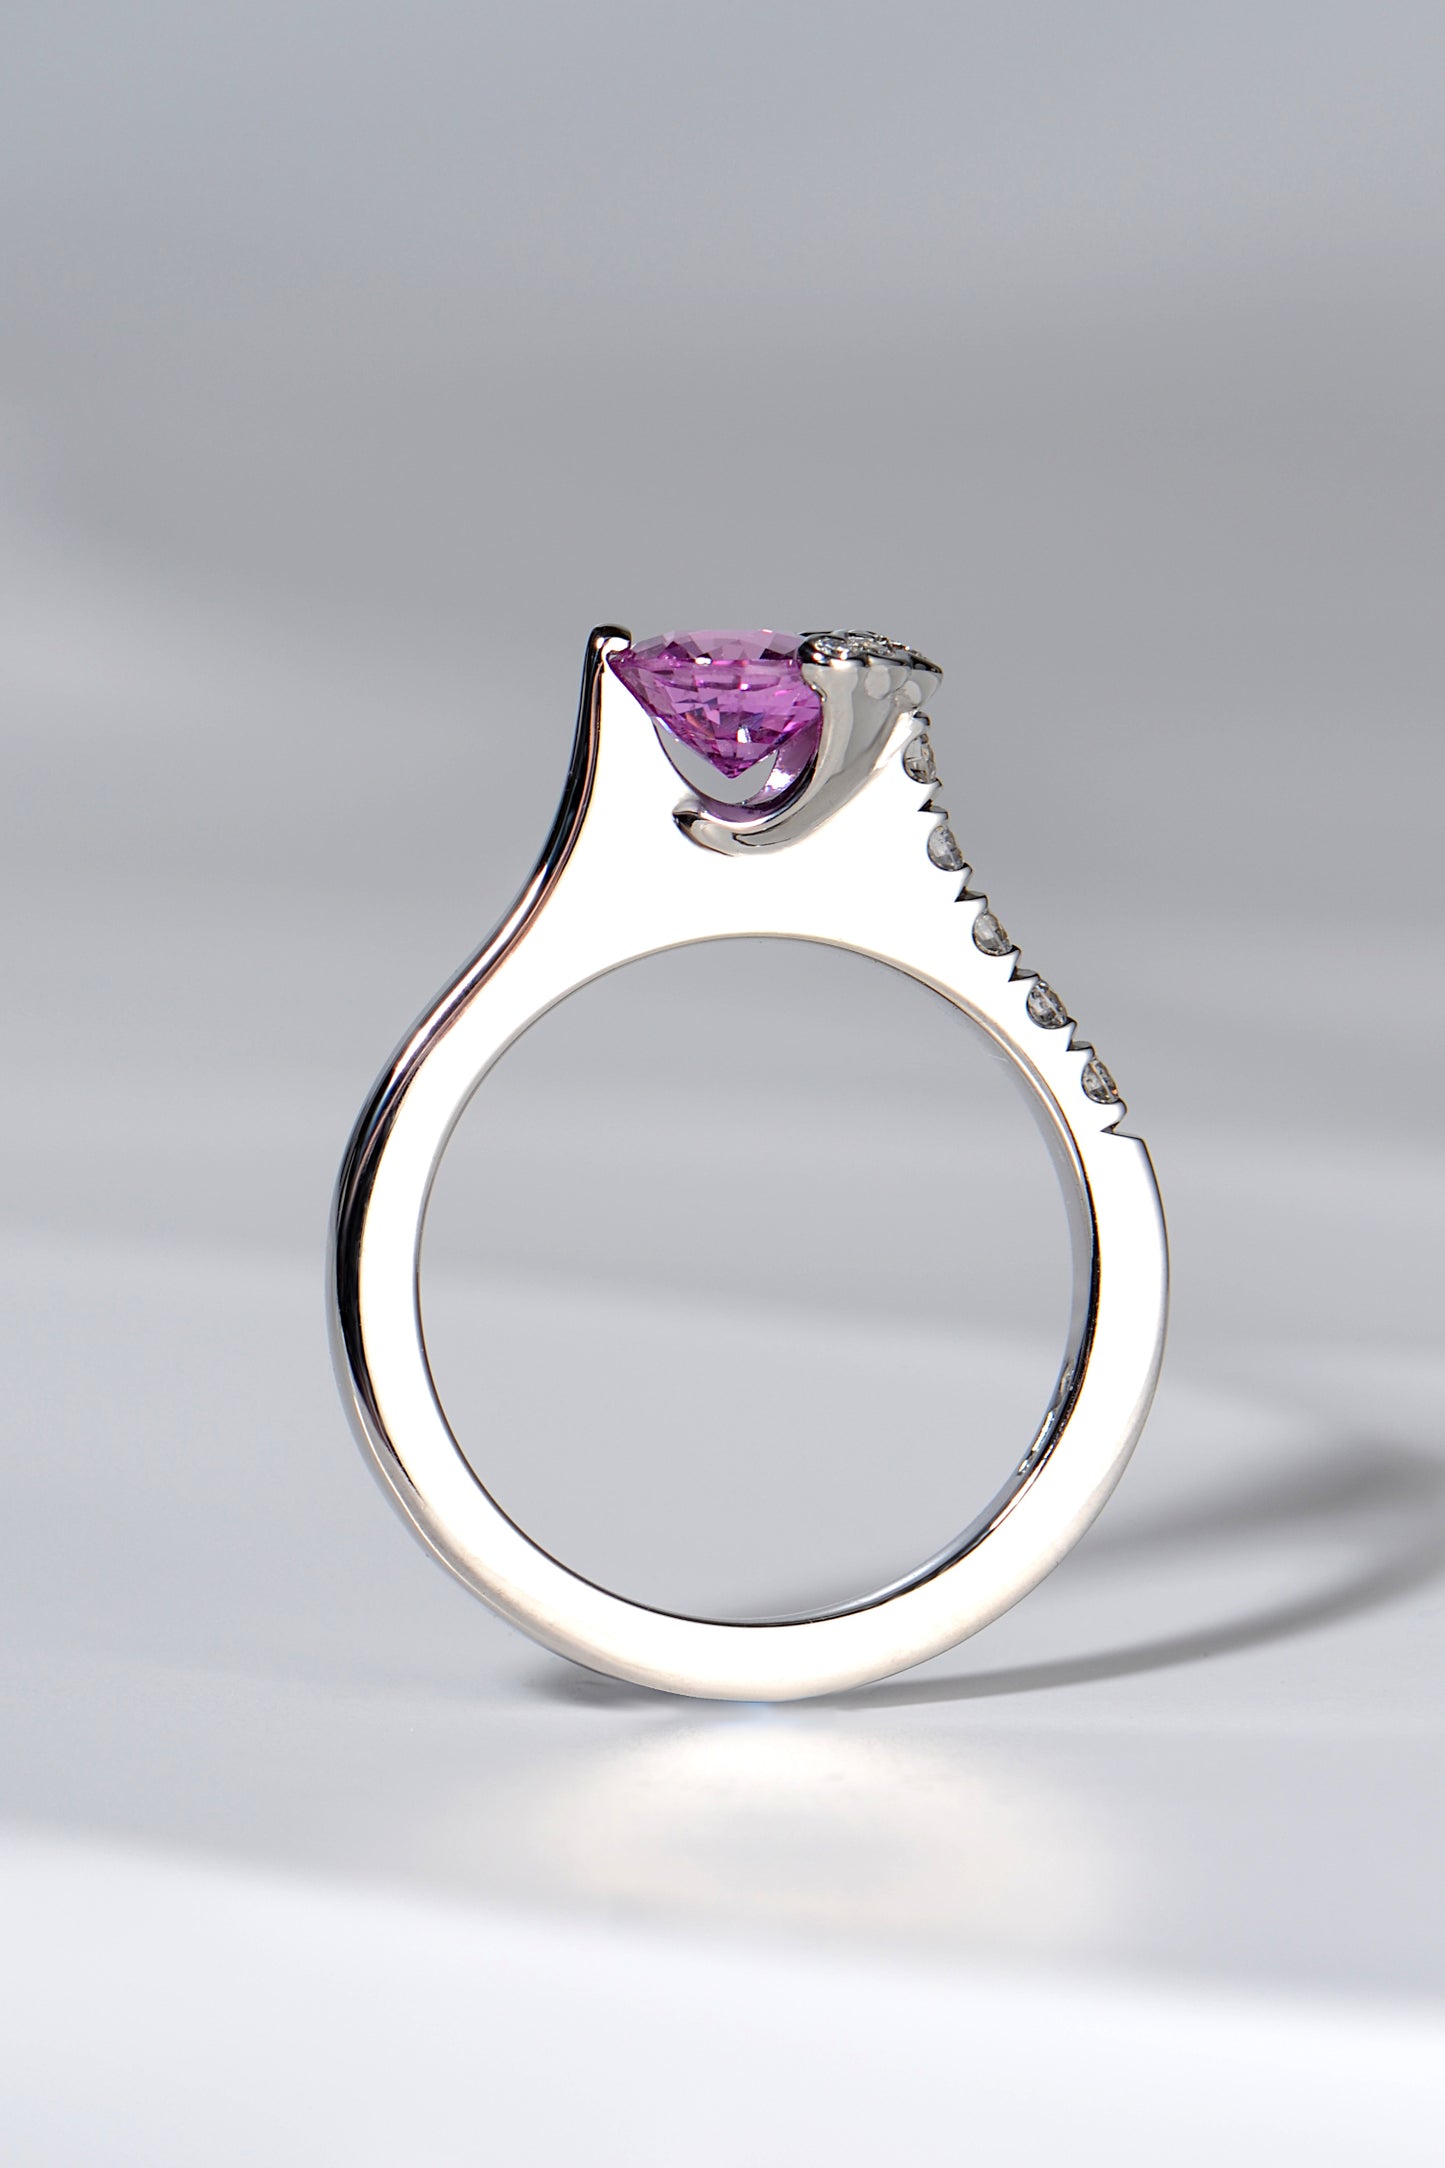 designer platinum diamond and pink sapphire ring that has the stone set so you can see the gemstone side on, like a tension set ring